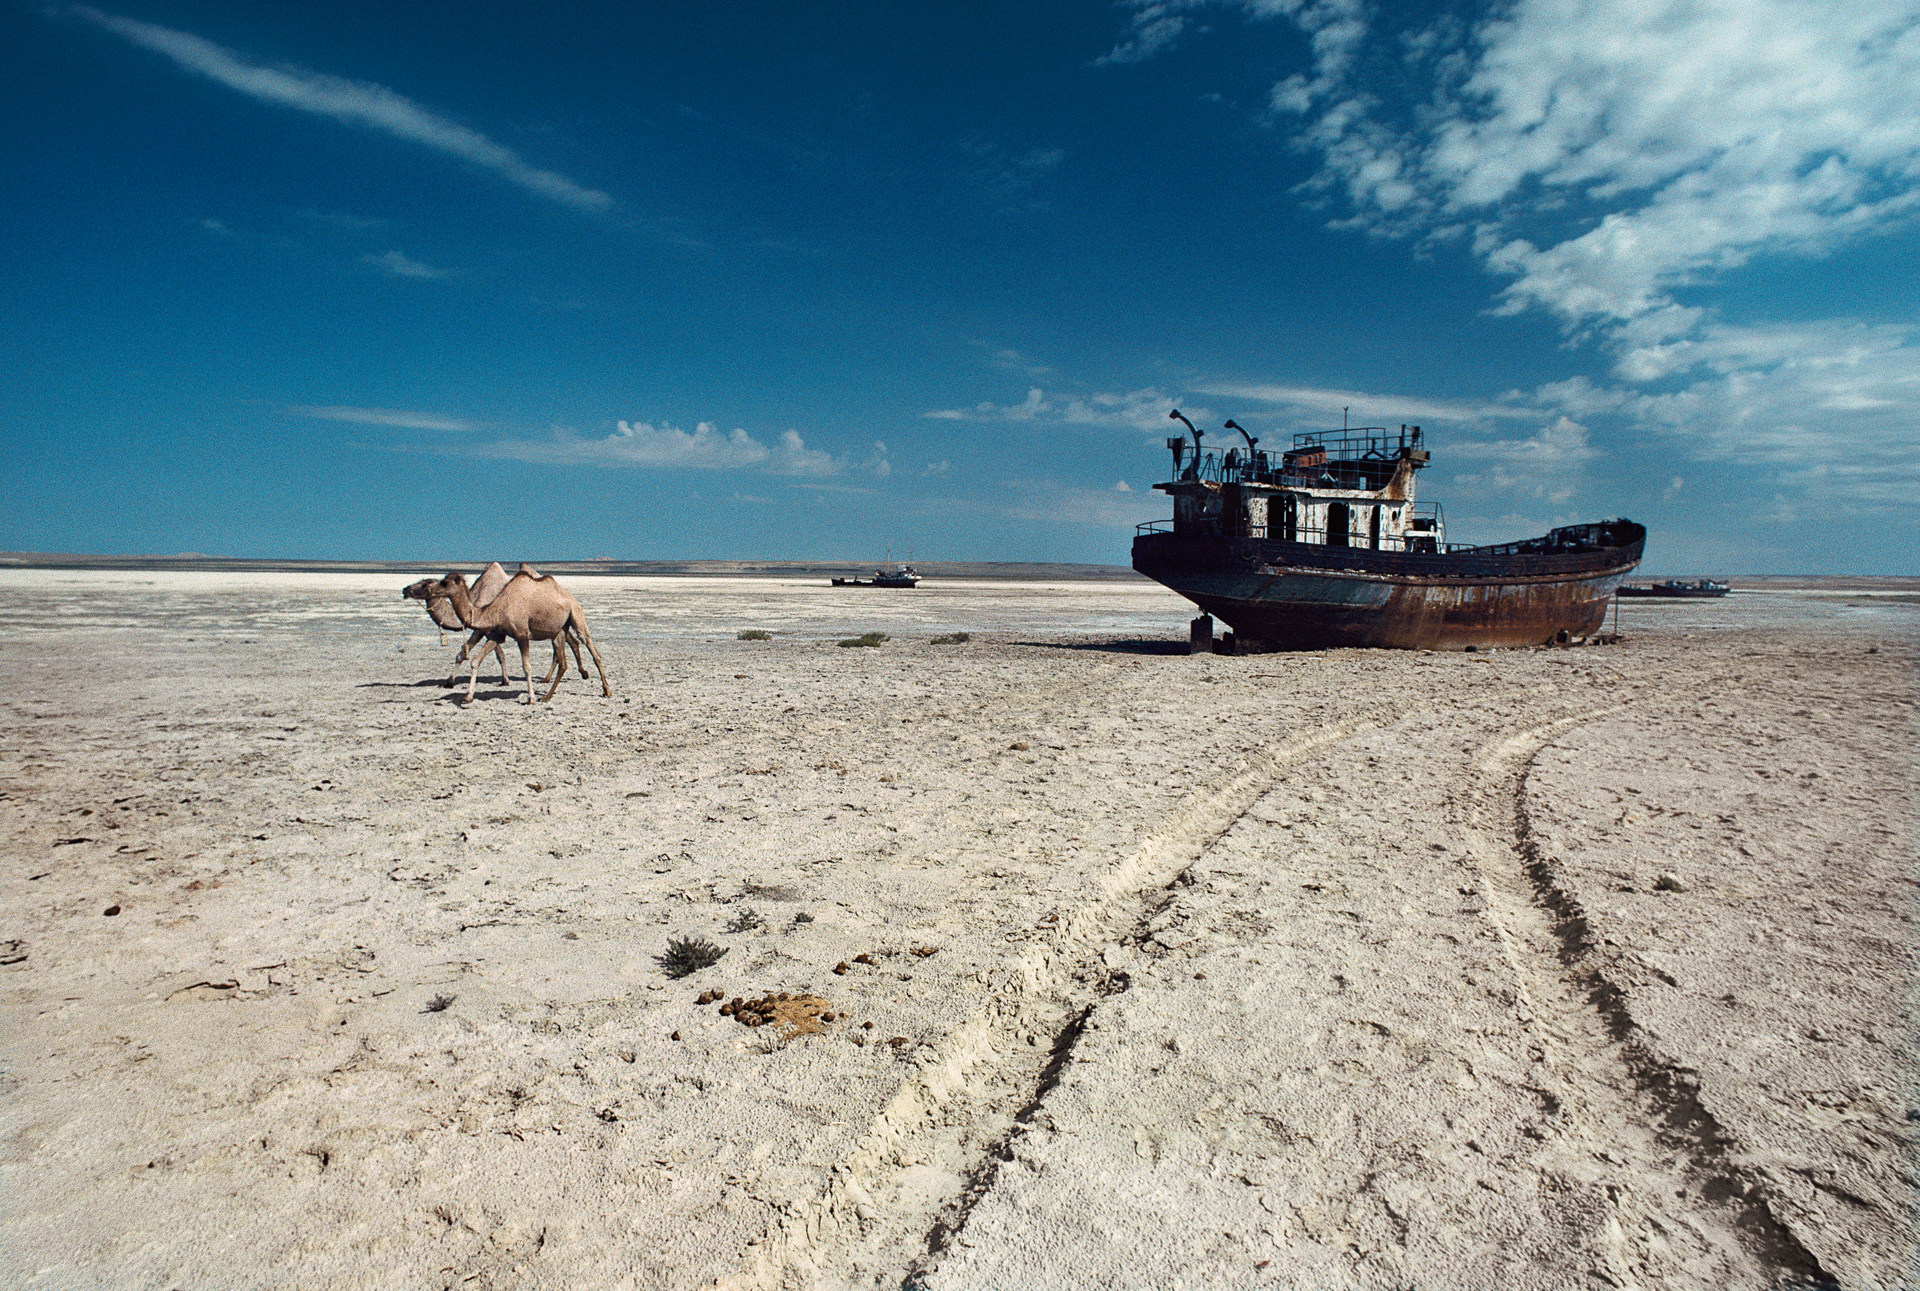  Camels cross the dry bed of the Aral Sea. Irrigation tapping into the lake’s feeder rivers has shrunk its size and created this graveyard of rusting shipwrecks, where a beautiful bay once glistened.  Aral Sea, Kazakhstan  